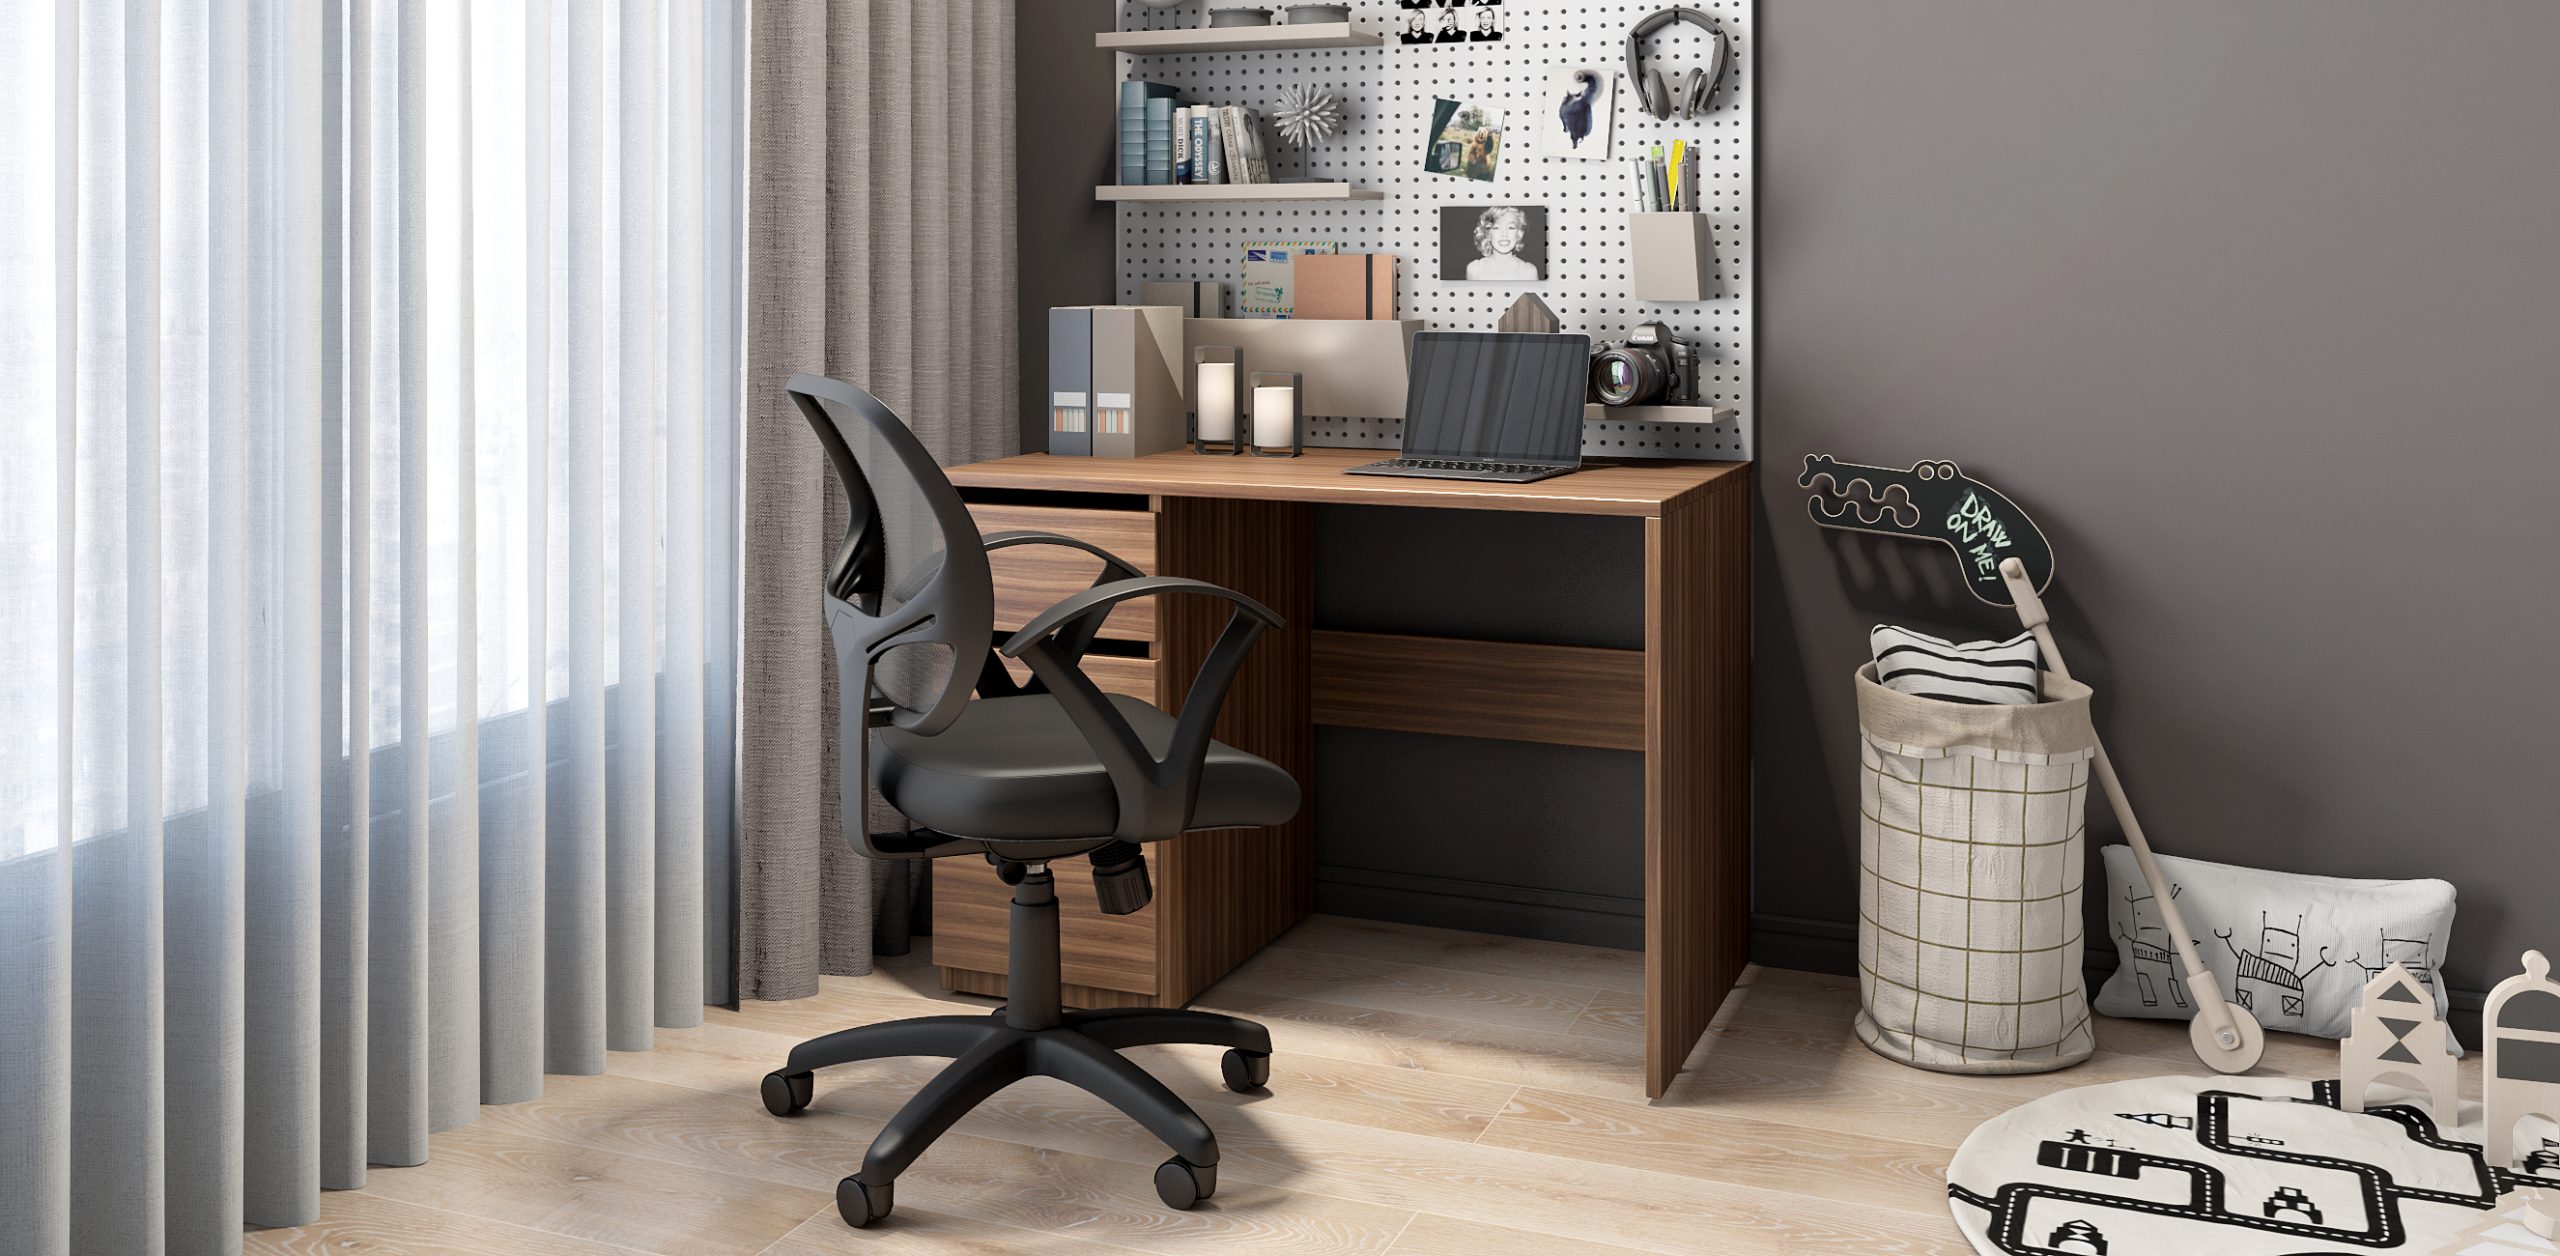 Creating a Healthy Work Environment with a Designer Study Table